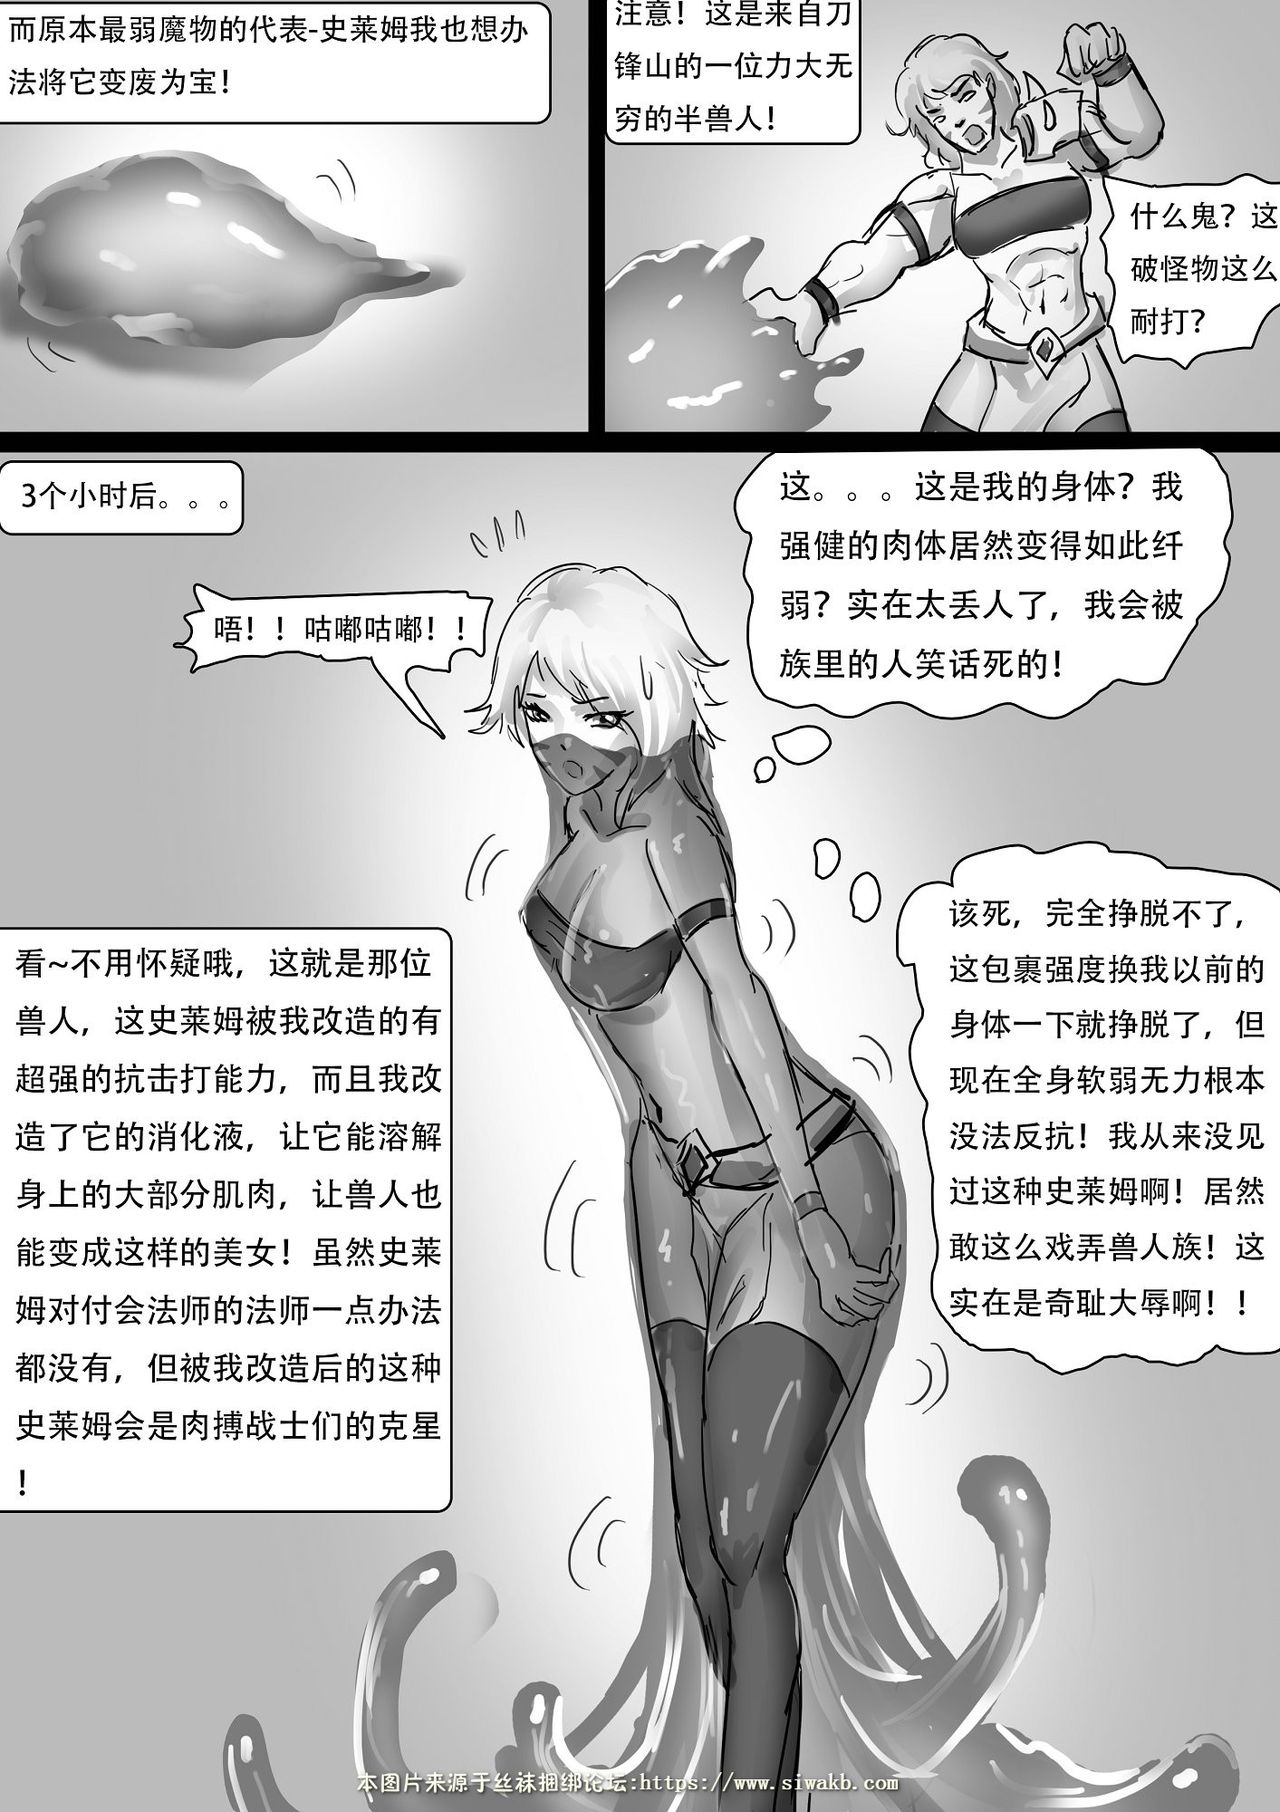 [King] The Devil's Plaything [Chinese] 6